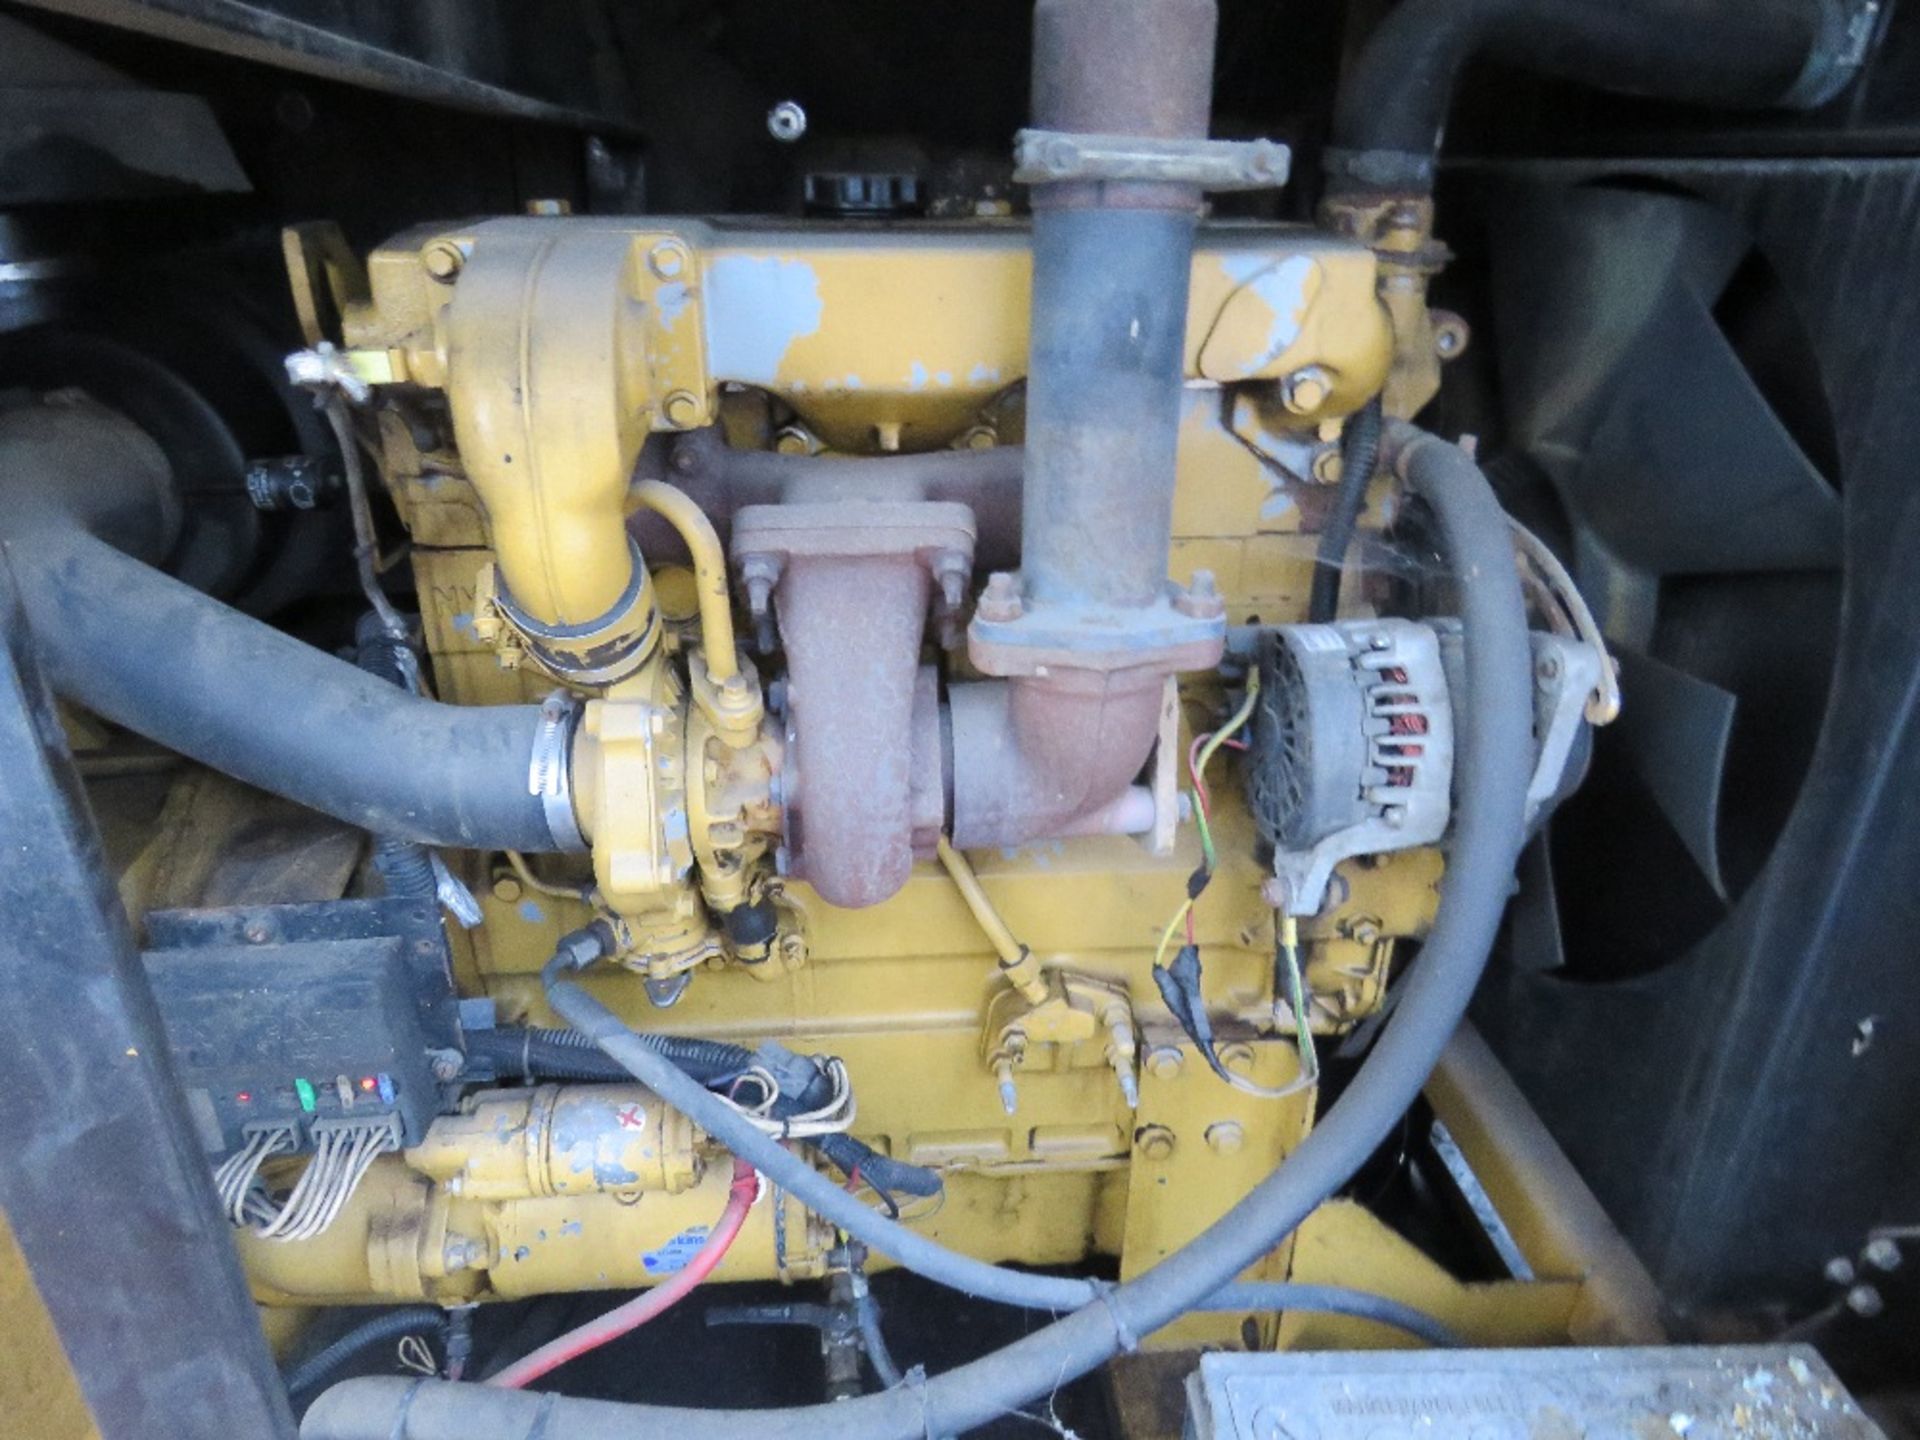 OLYMPIAN 65KVA SILENCED GENERATOR. MODEL GEP65-3, YEAR 2000. PERKINS ENGINE (BELIEVED TO HAVE BEEN R - Image 6 of 7